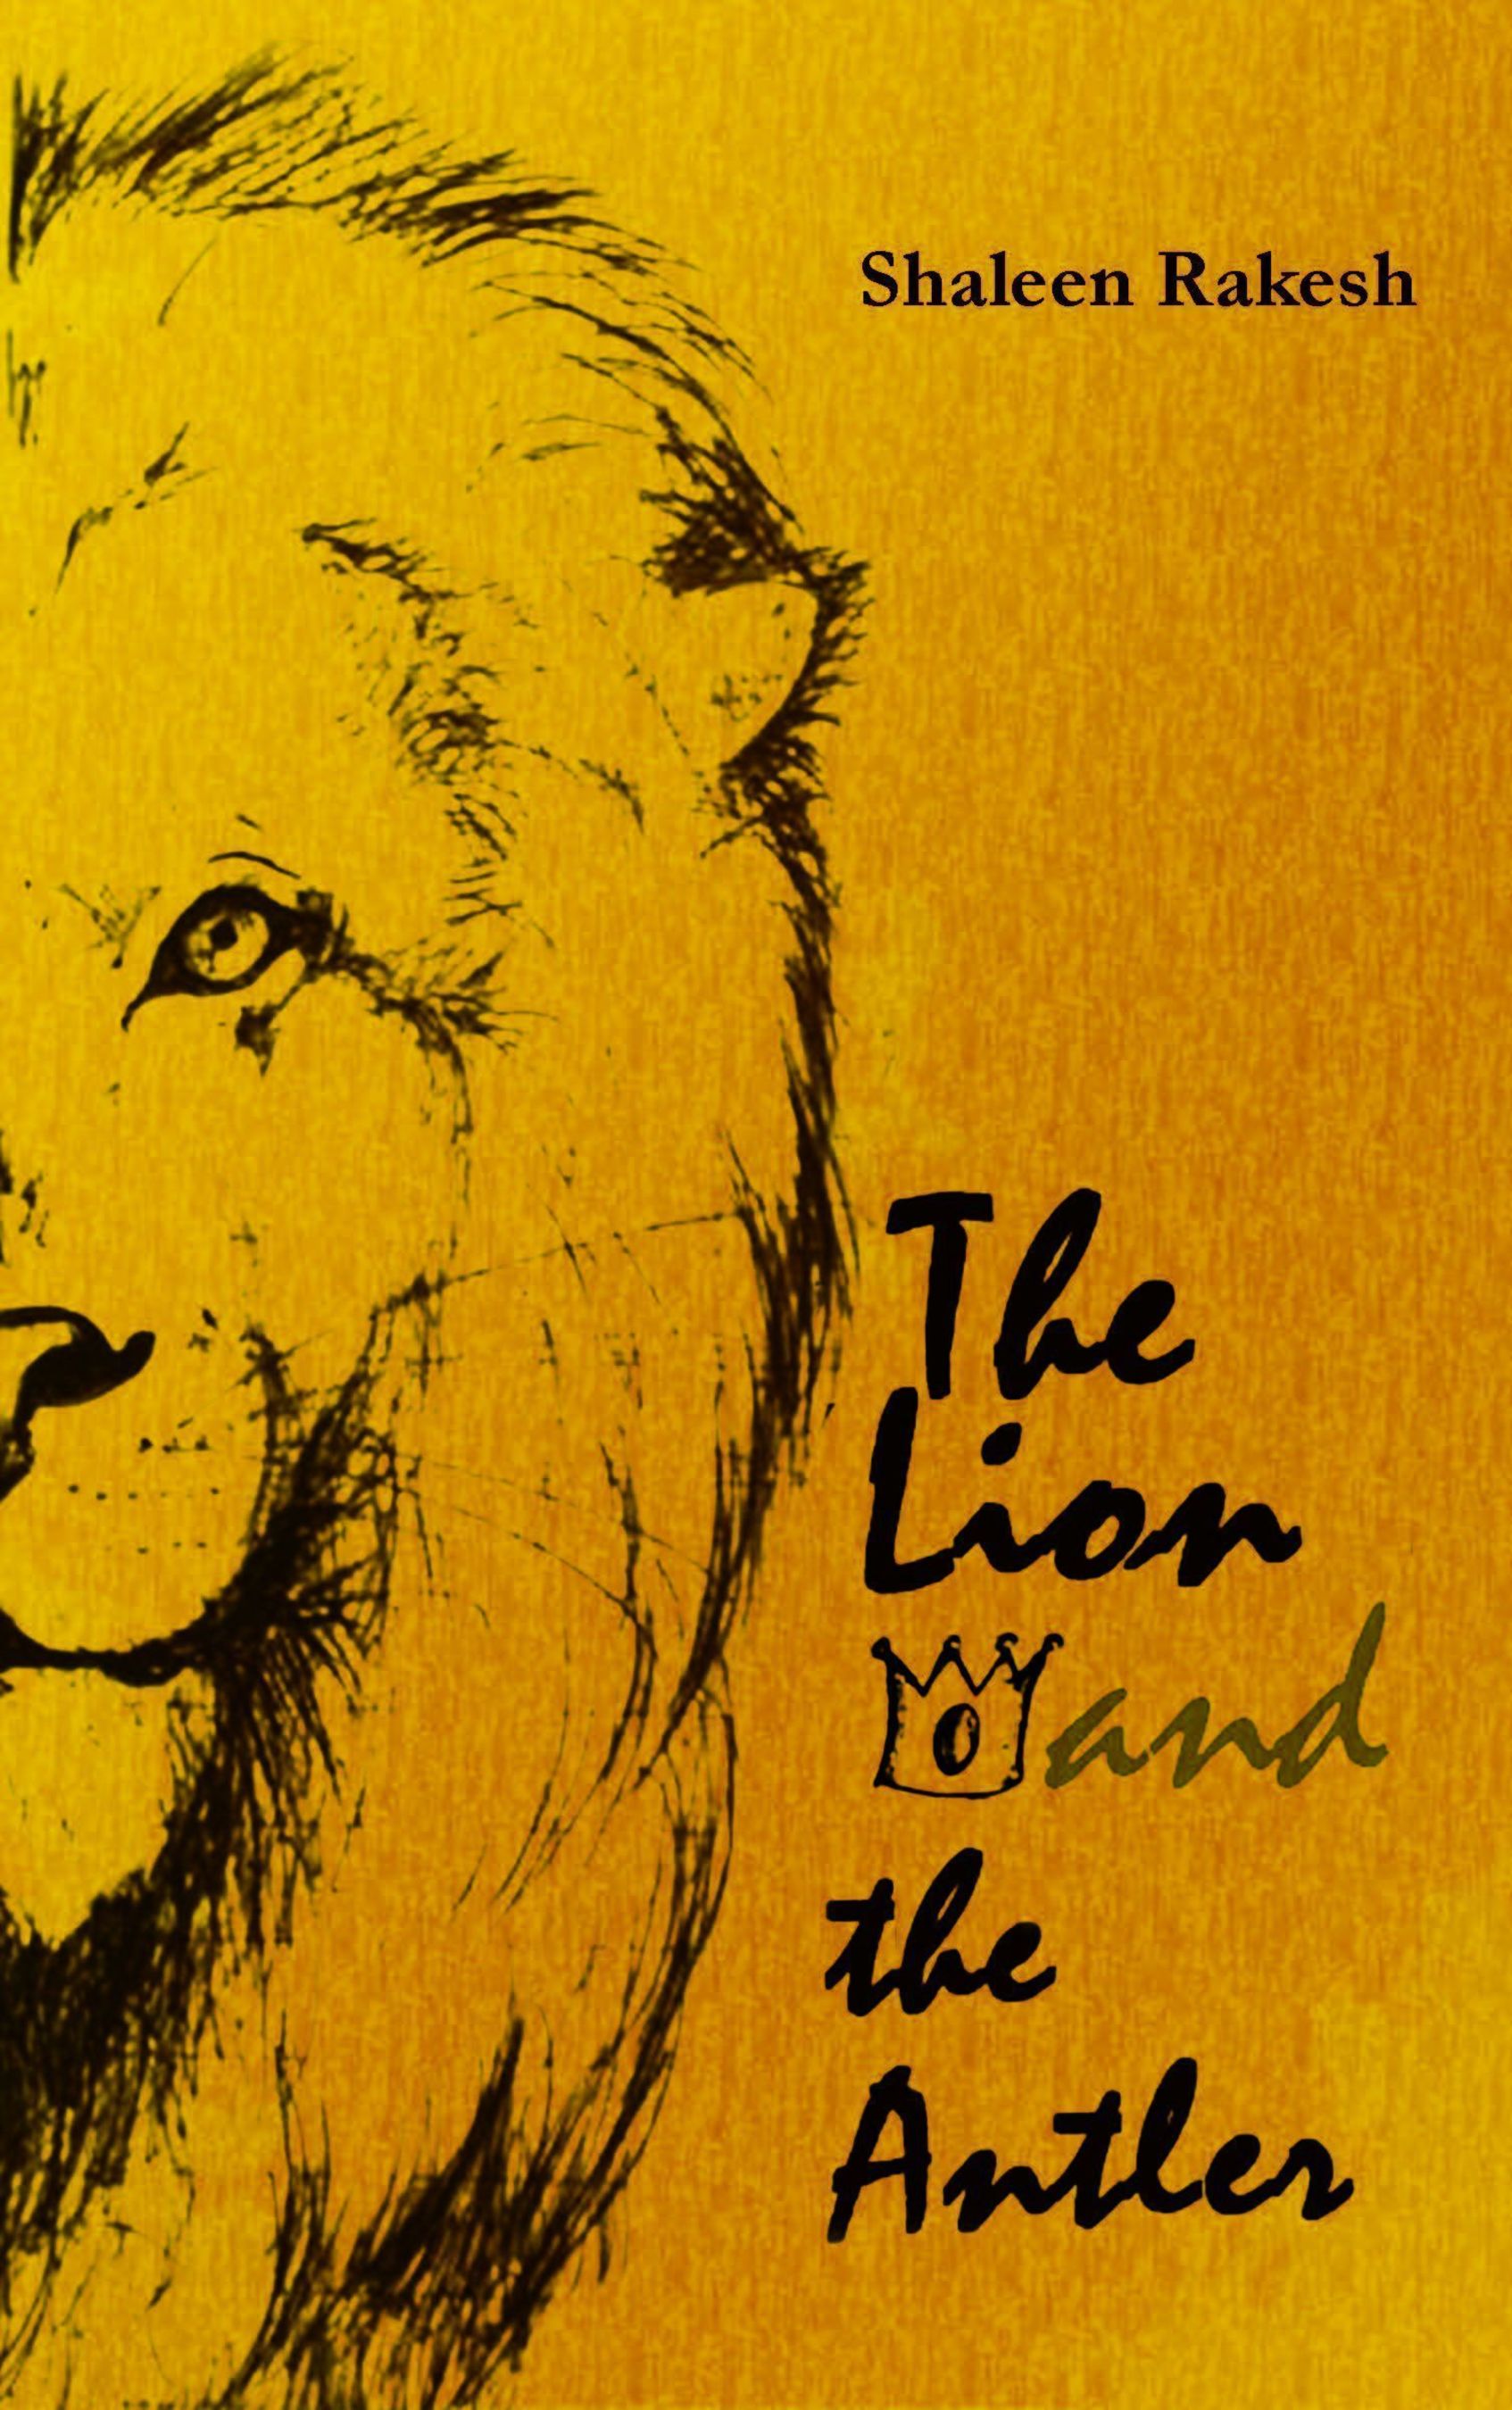 Look of the Book Cover 'The Lion and the Antler' (PRNewsFoto/World View Publications)